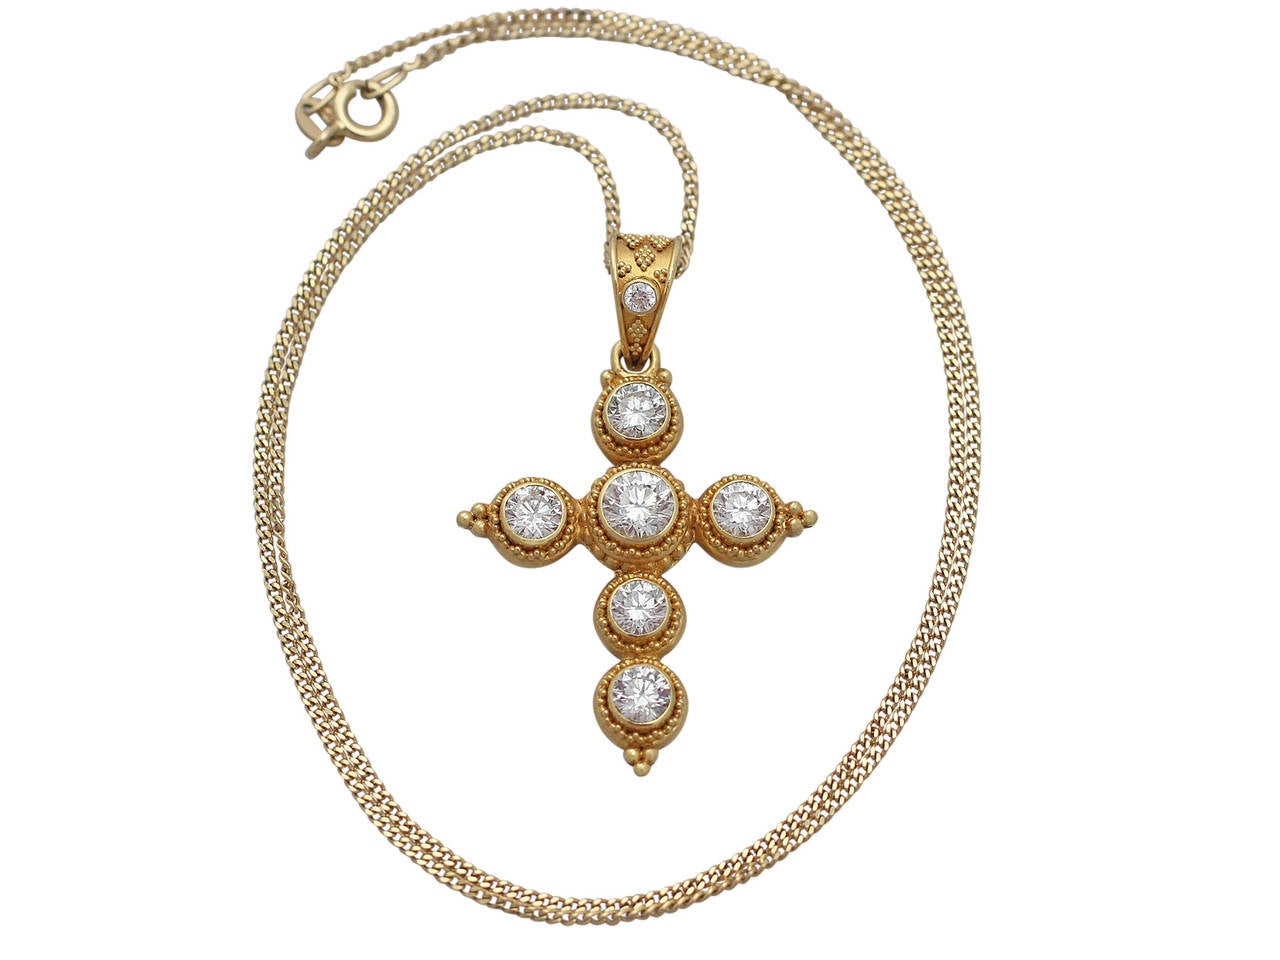 A very fine and impressive vintage 2.54 carat diamond and 22 karat yellow gold cross pendant; part of our diverse vintage jewelry range

This fine and impressive vintage cross pendant has been crafted in 22k yellow gold.

The pendant displays a